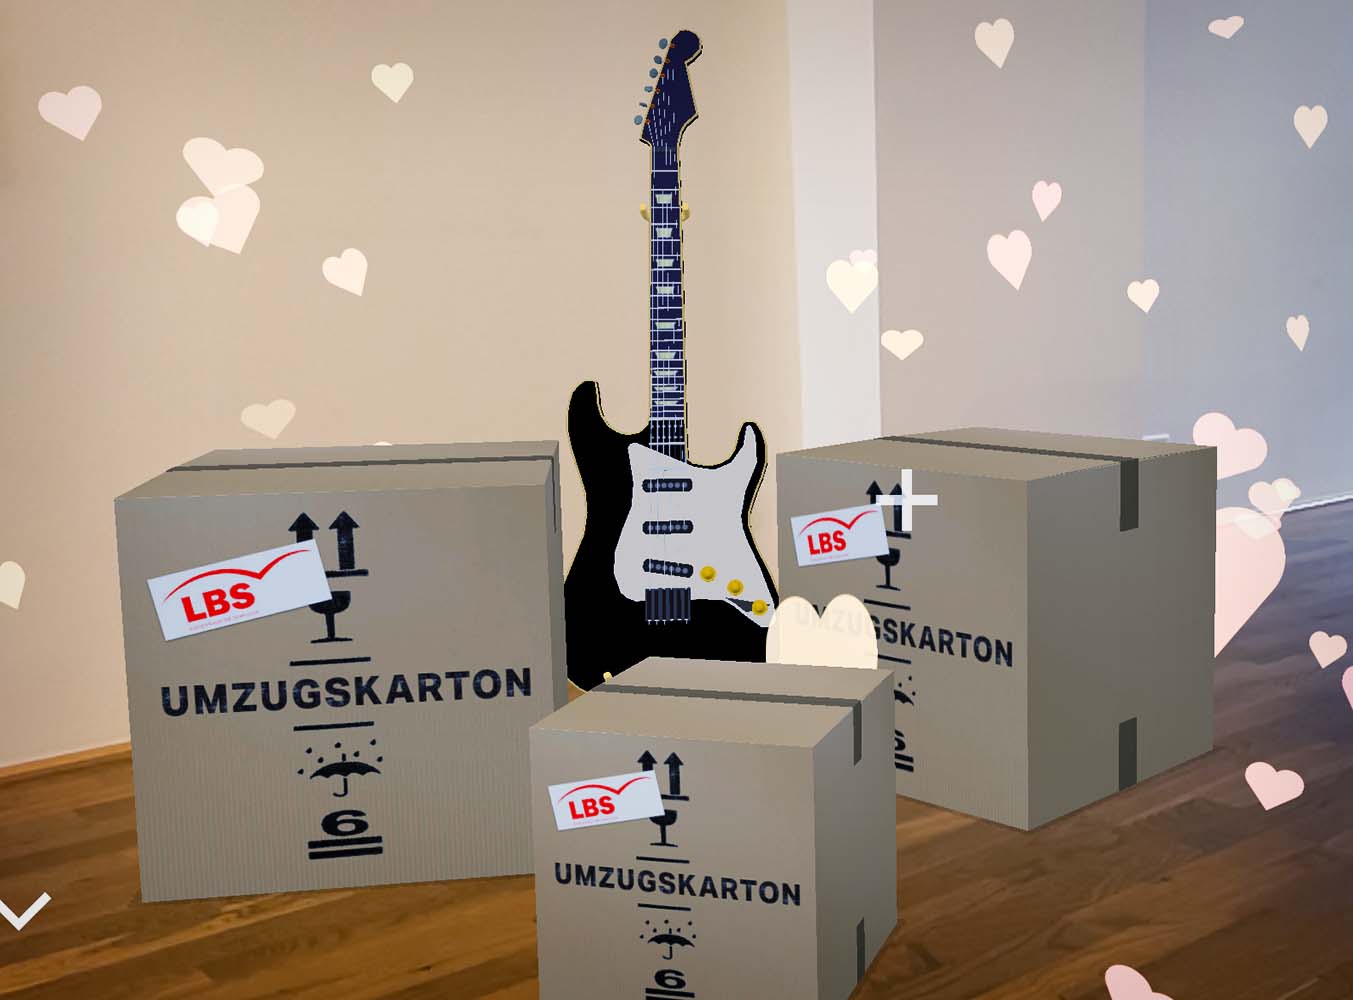 A room with a white wall and parquet floor. On the floor are augmented reality representations of three cardboard boxes and an electronic guitar created by a user with the See You app. Floating in the room are hearts that were also generated using the app.